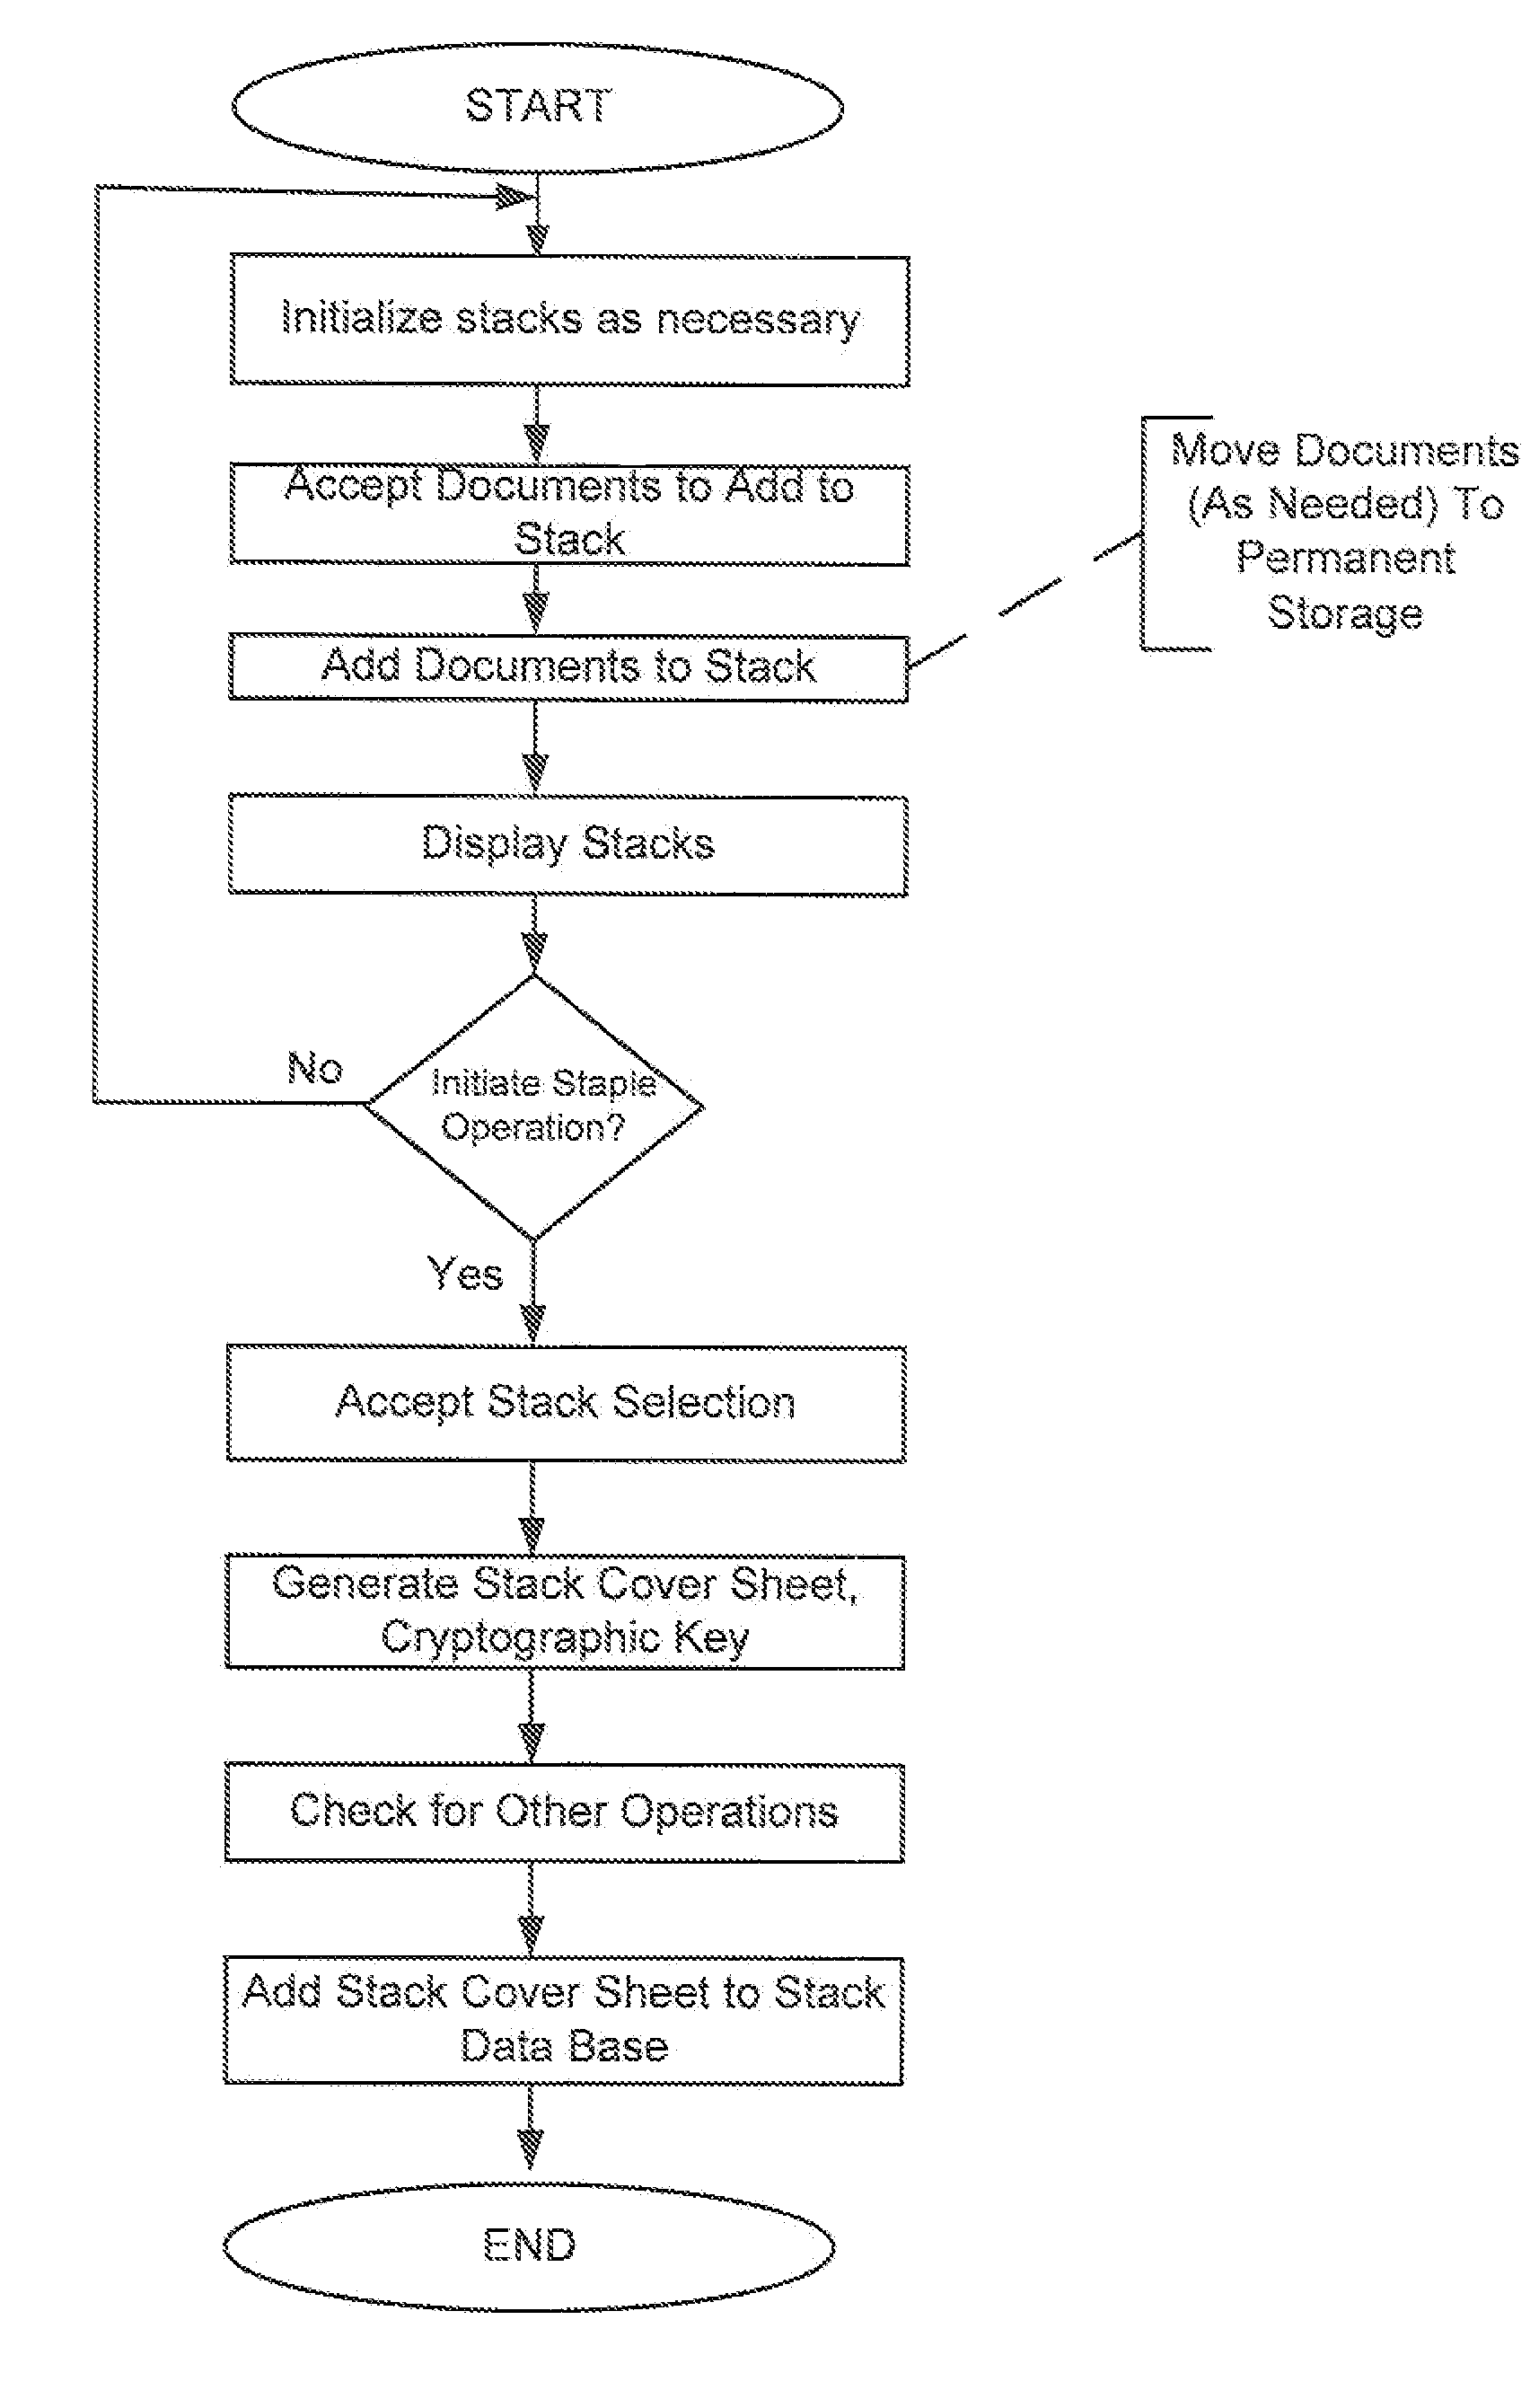 Document storage system including a user interface for associating documents into groups